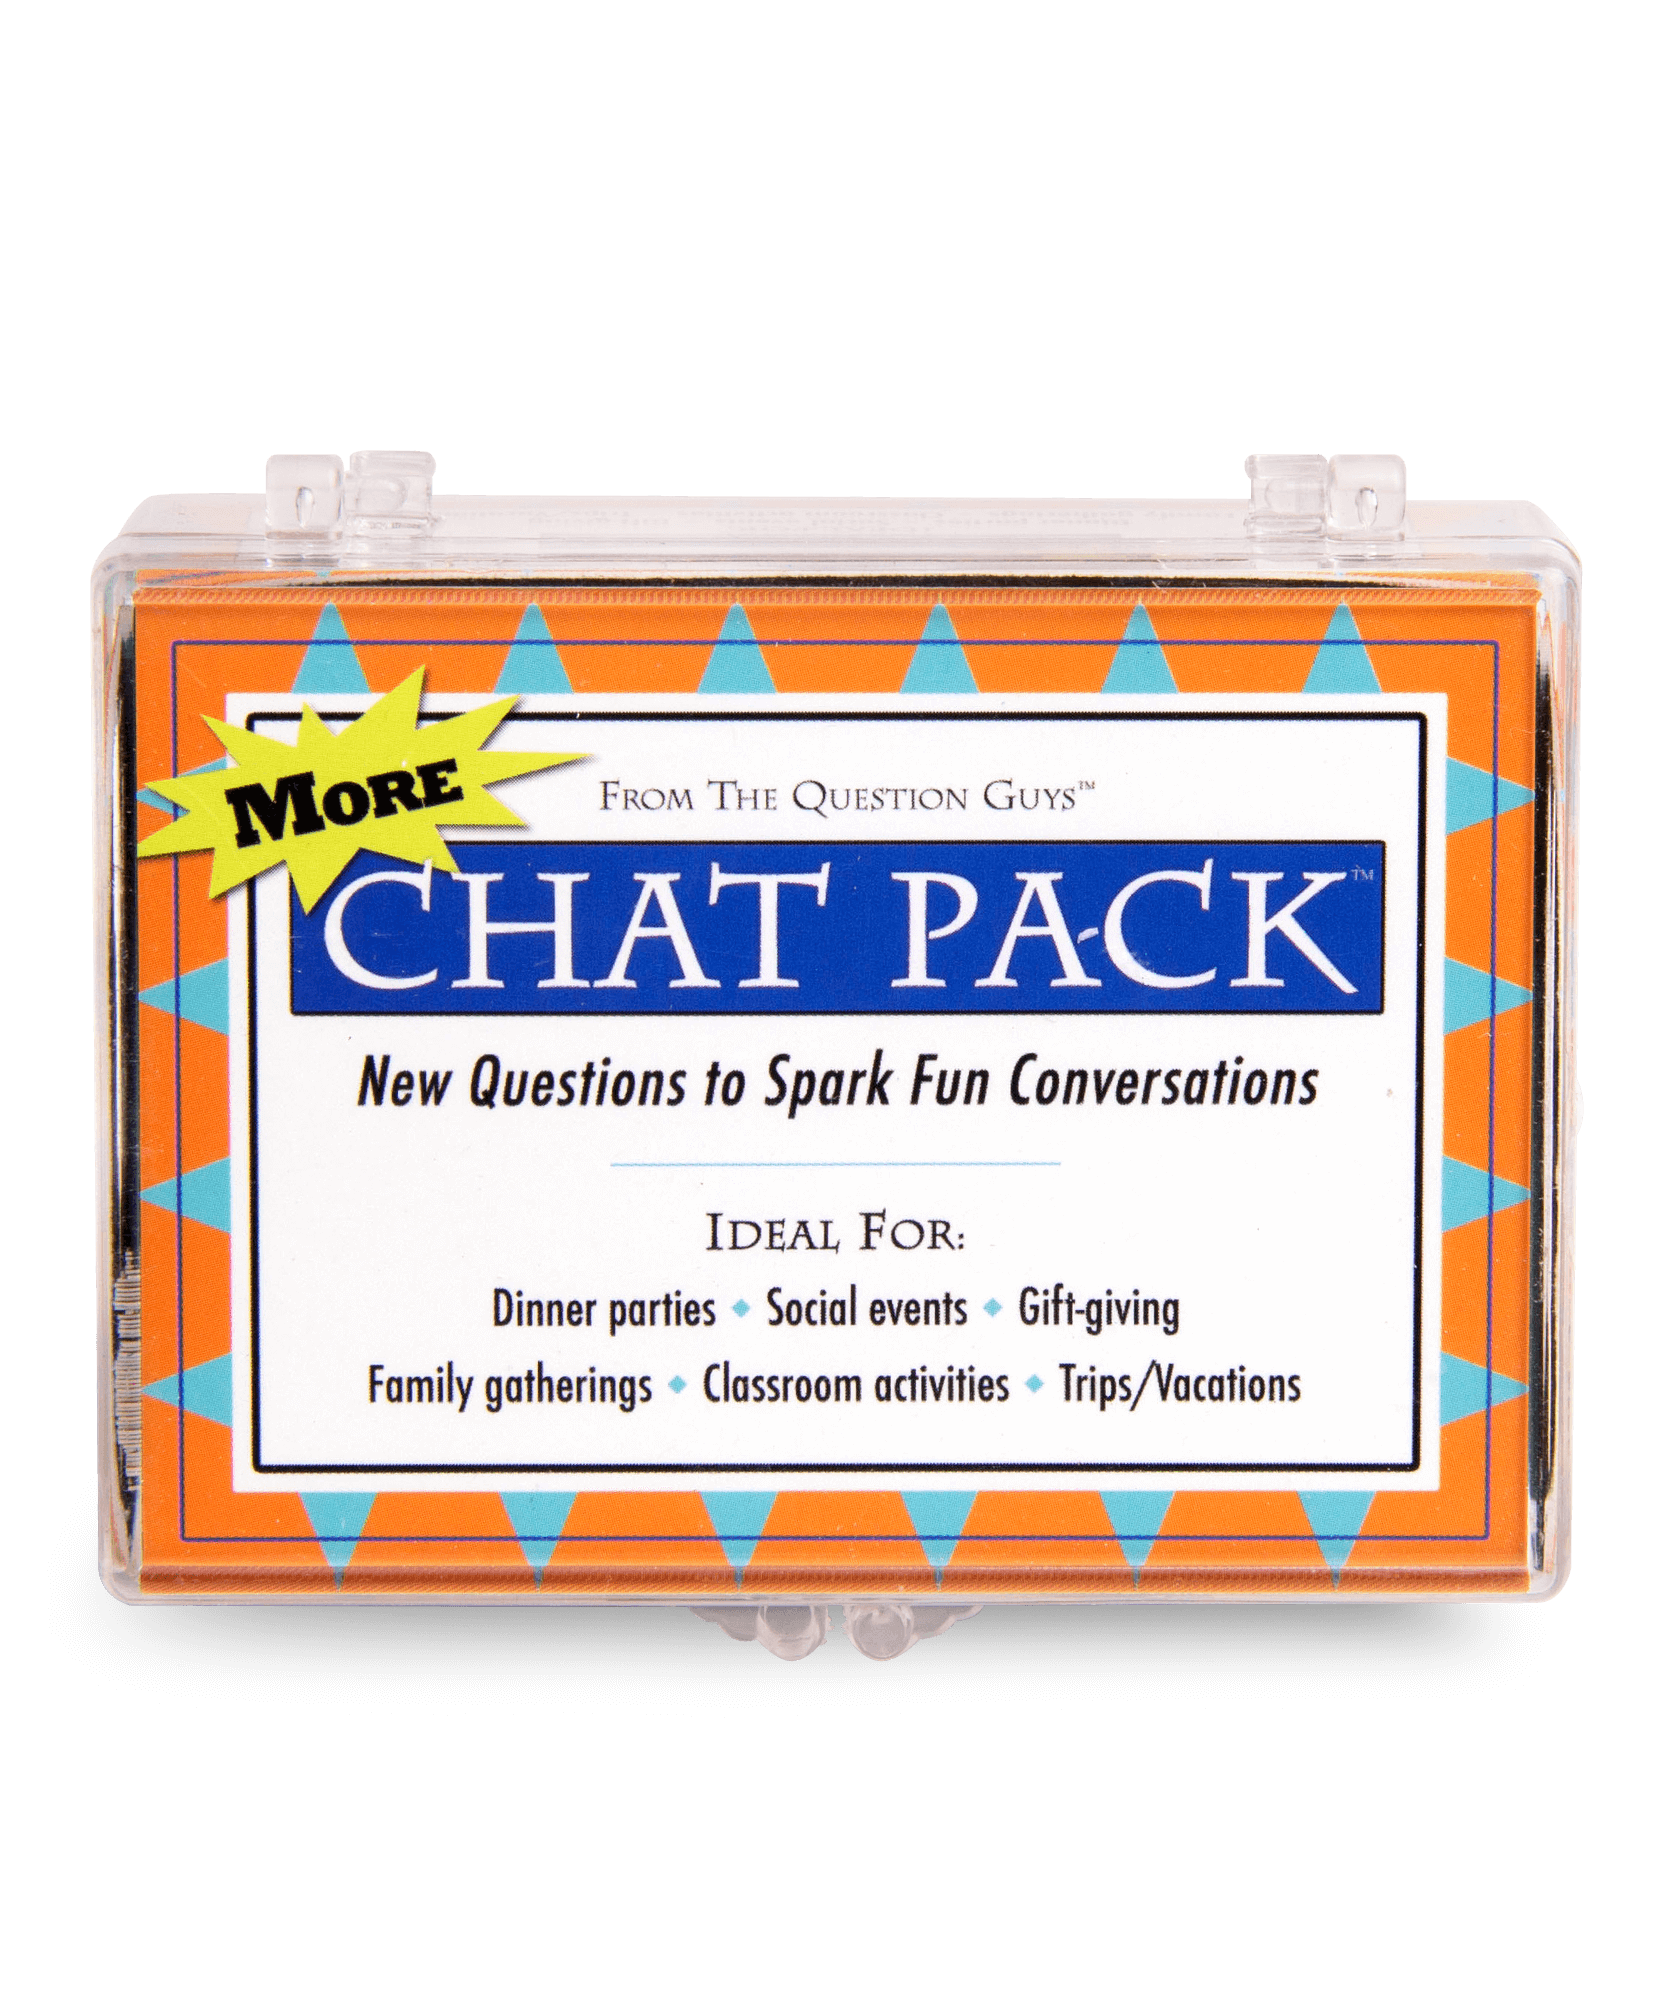 More Chat Pack - cards to spark conversation topics